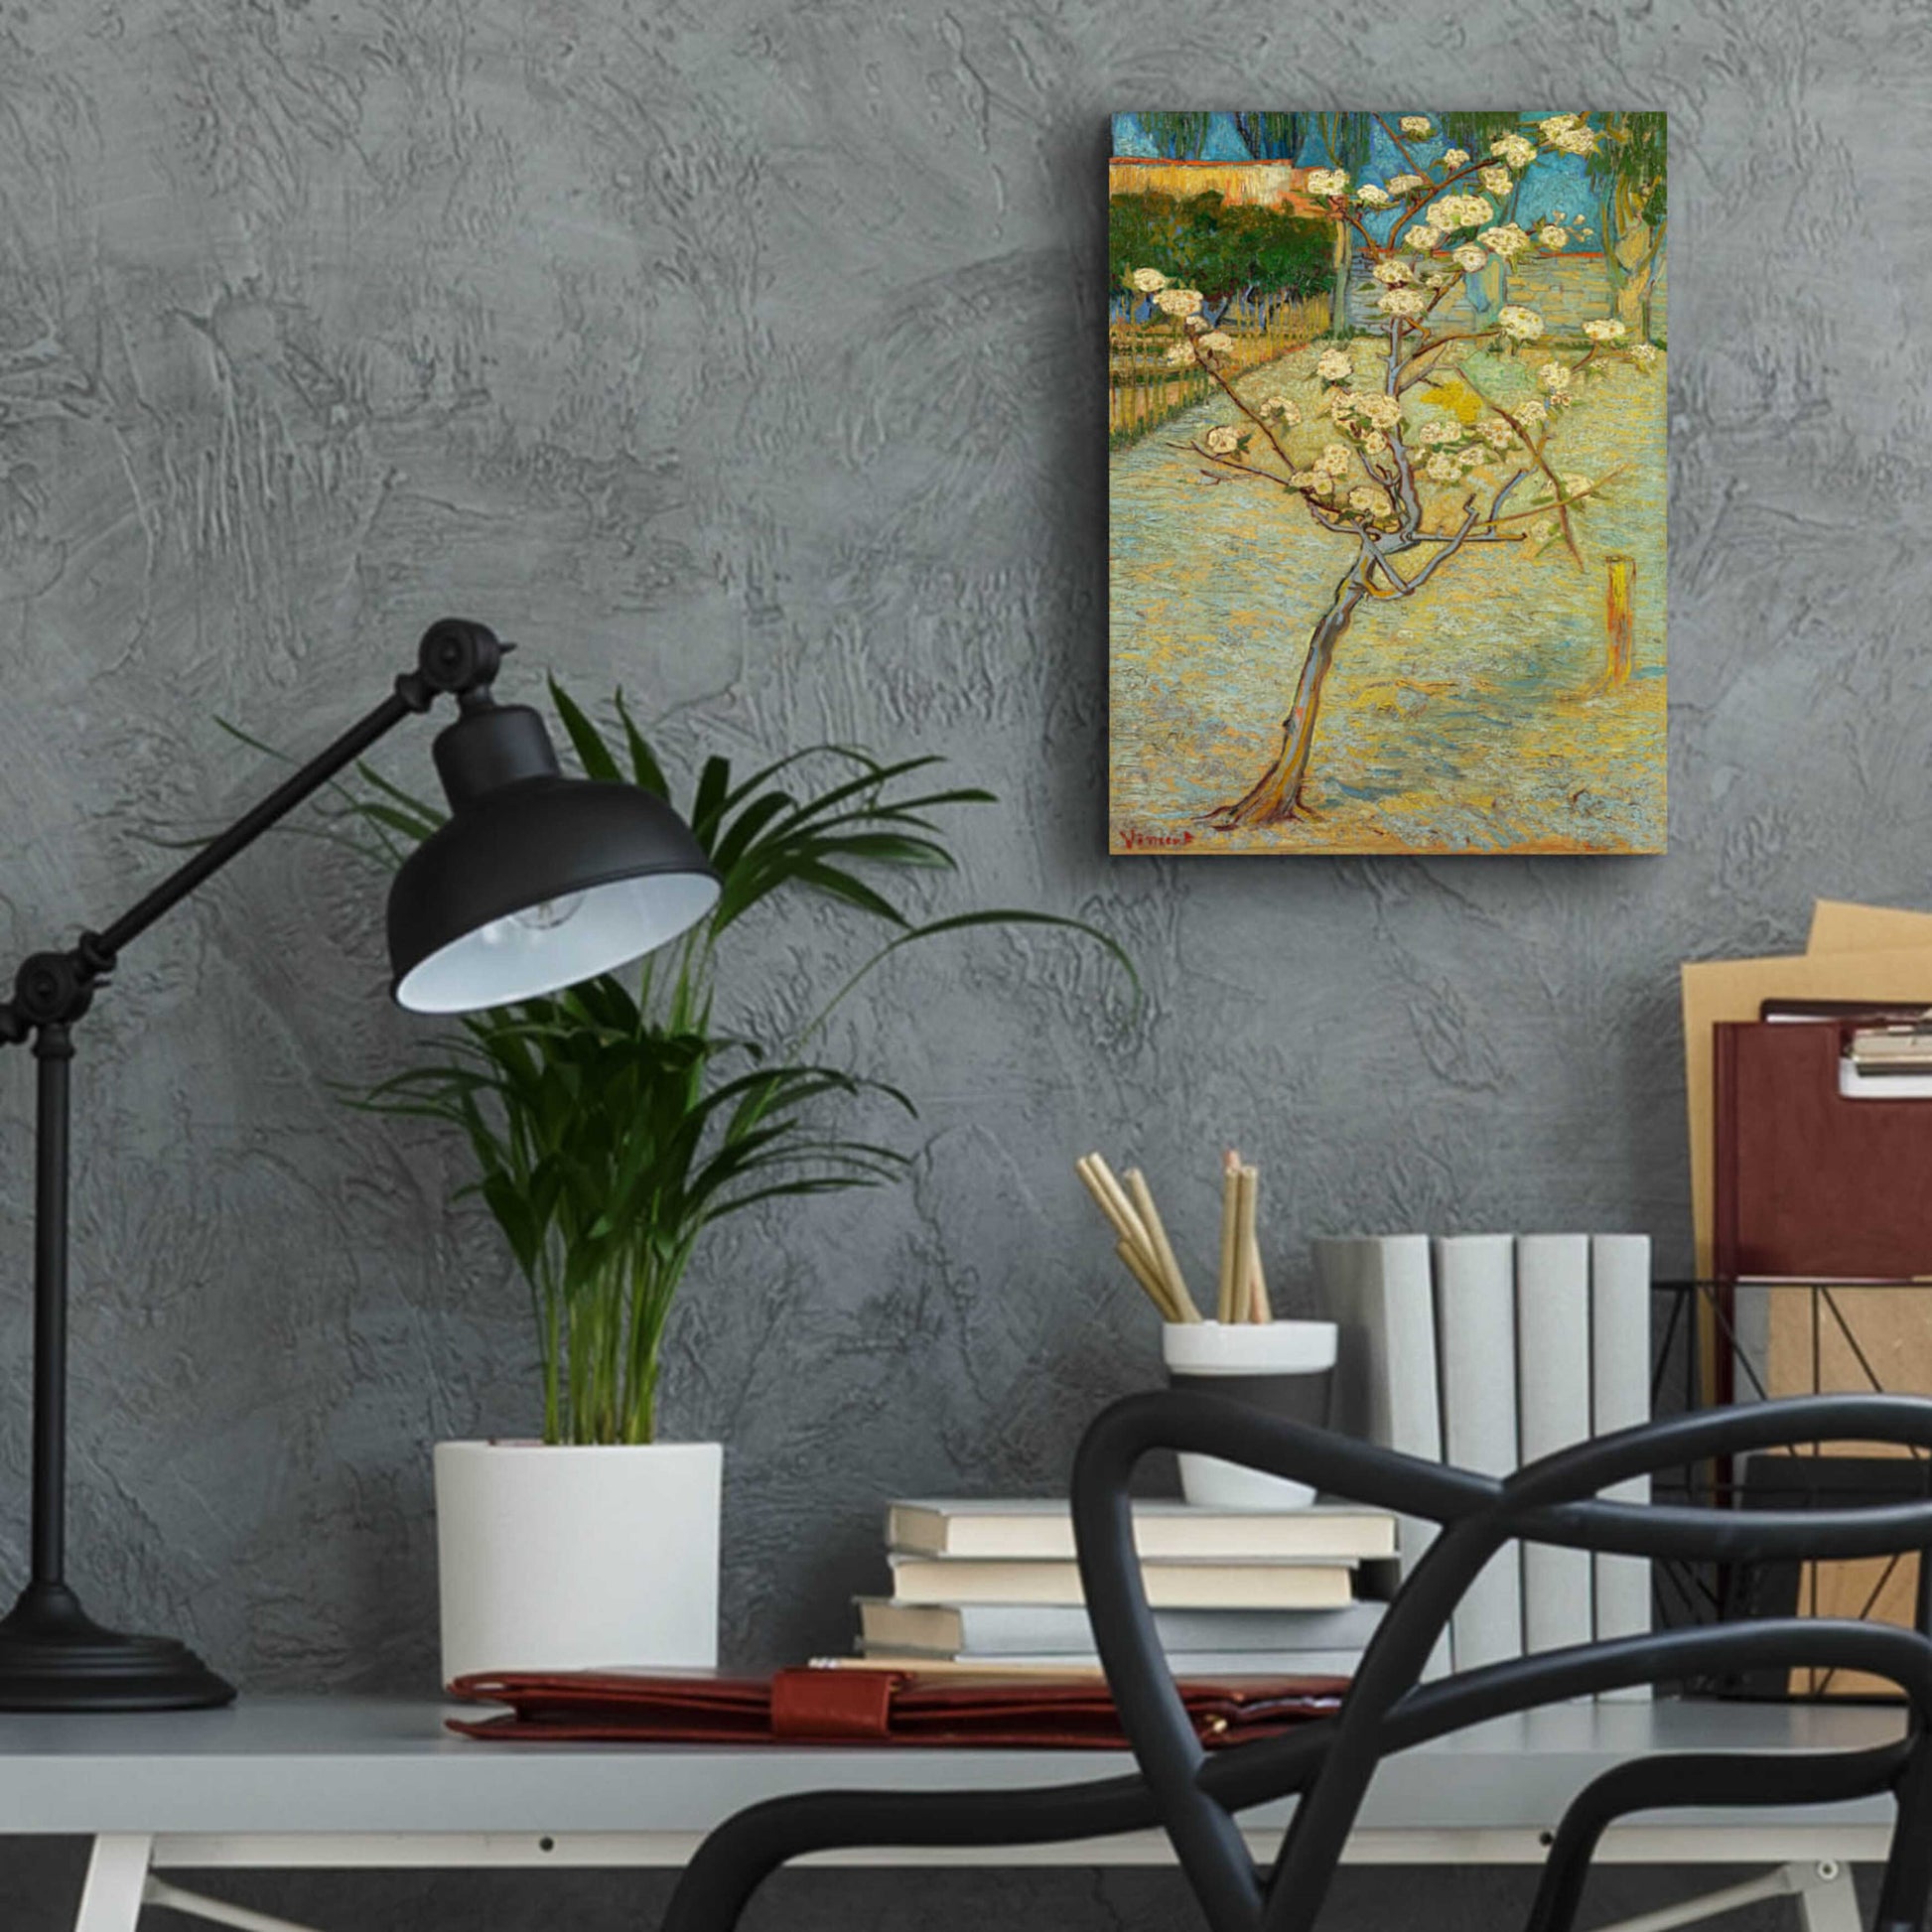 Epic Art 'Small Pear Tree In Blossom' by Vincent Van Gogh, Acrylic Glass Wall Art,12x16